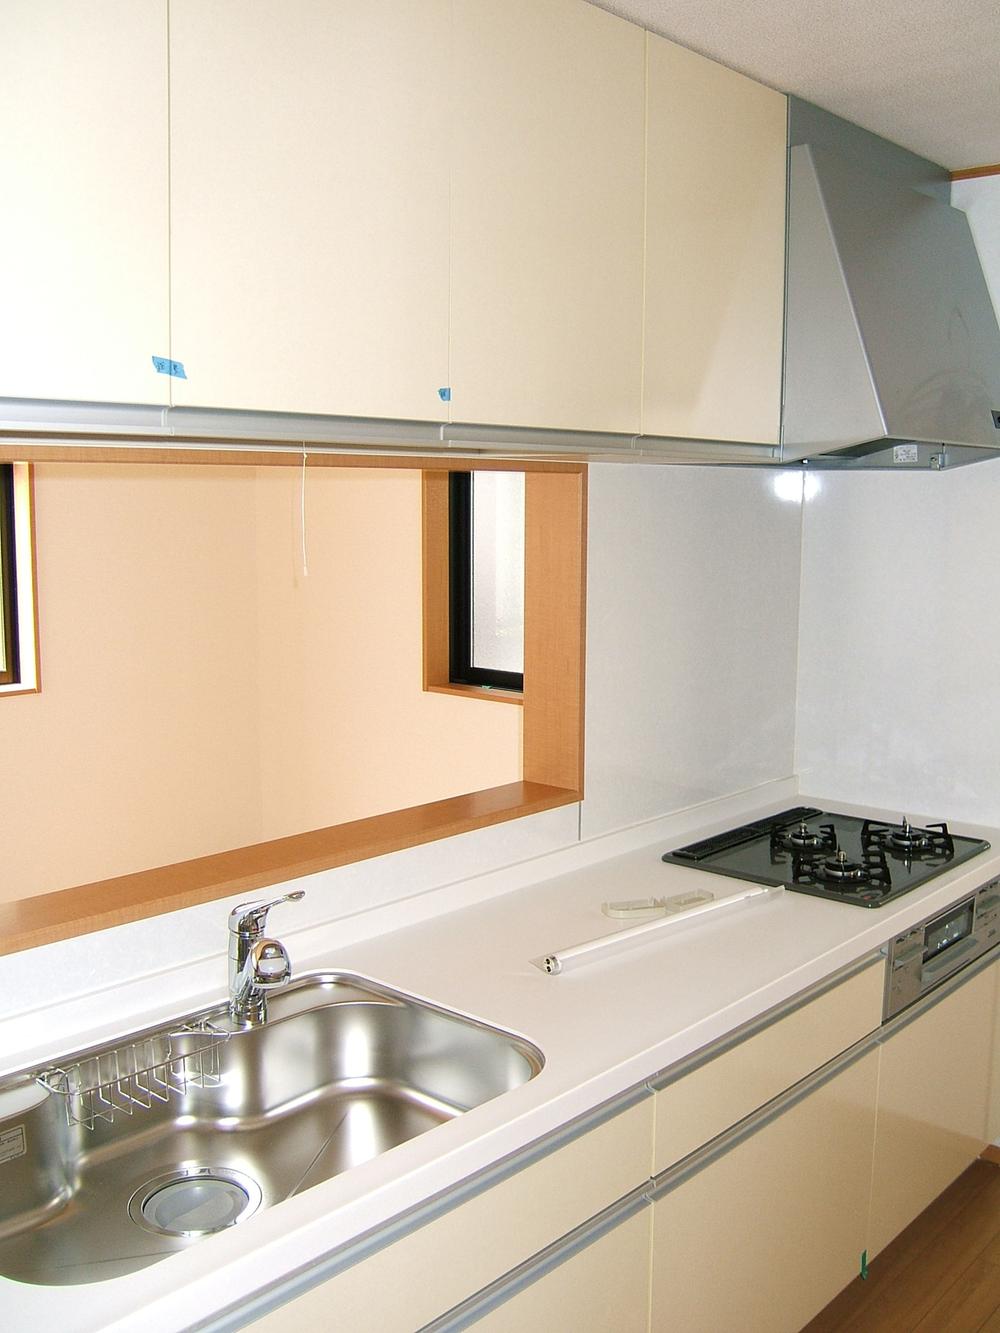 Same specifications photo (kitchen). The company specification